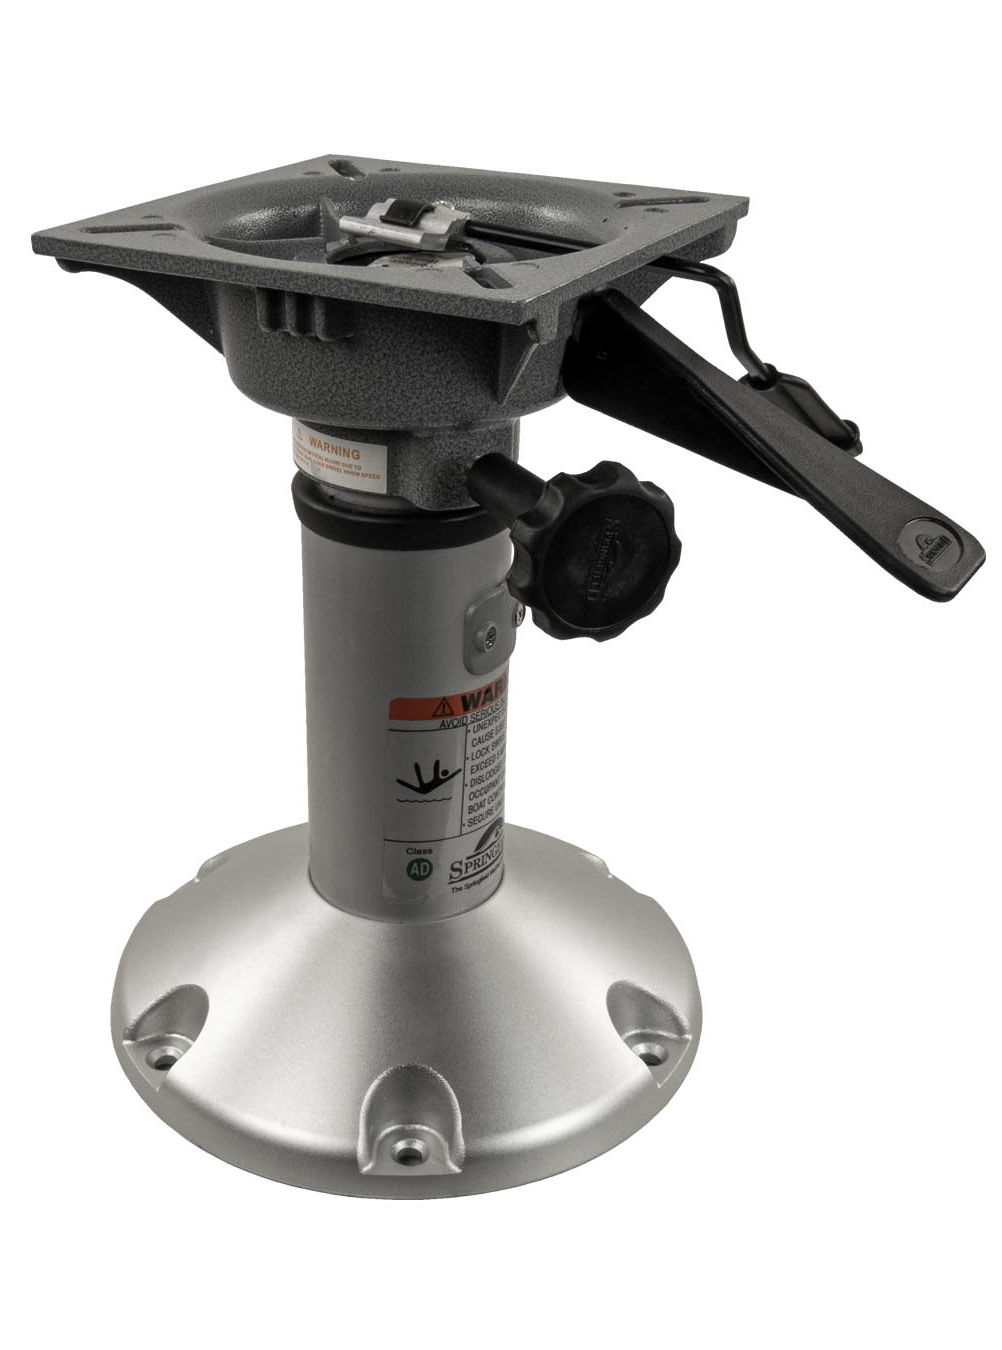 1250200 boat seat pedestal stand